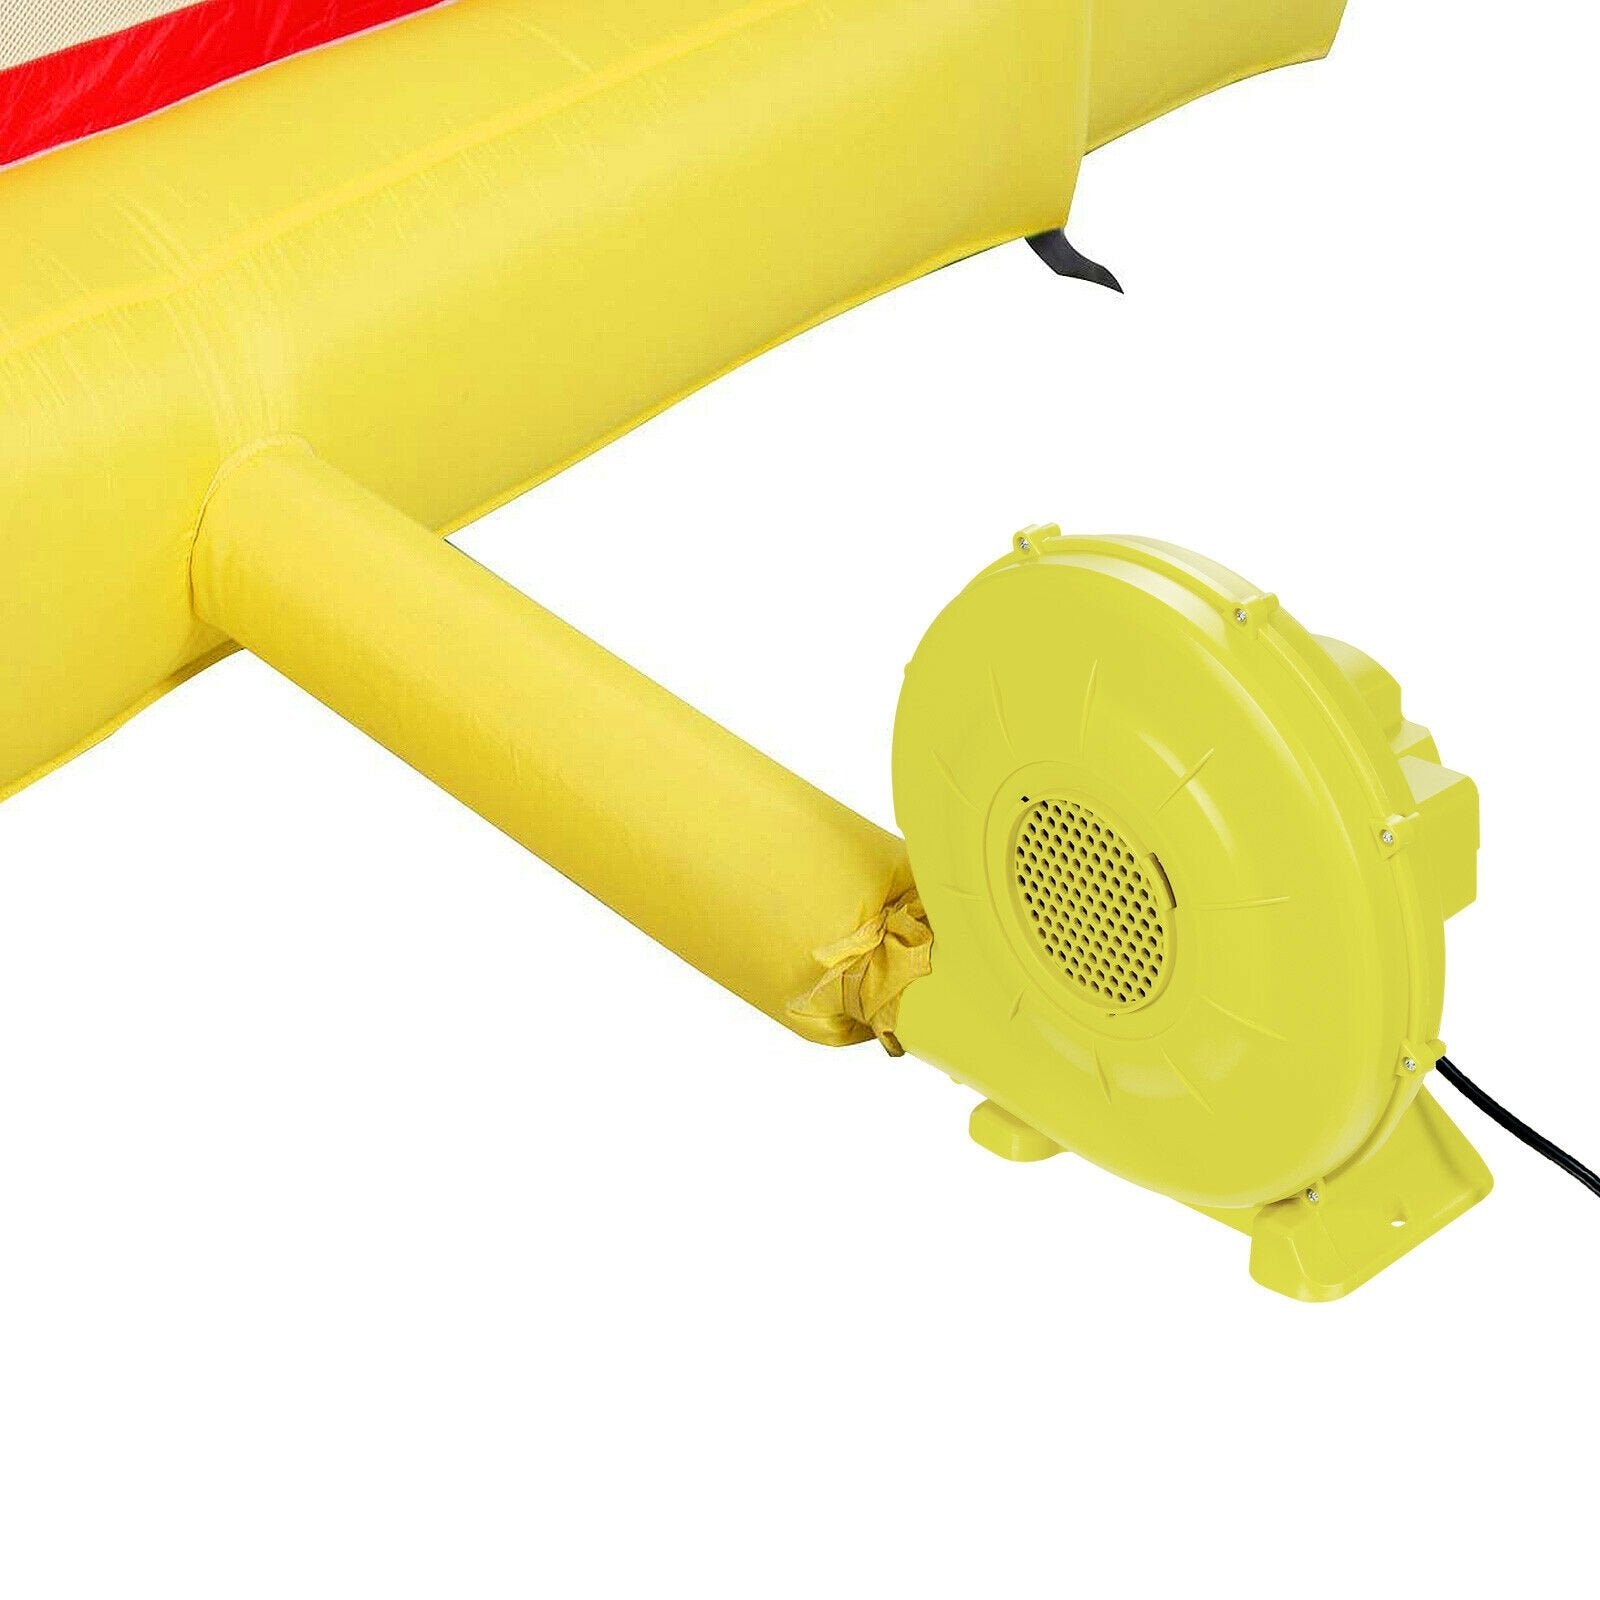 350 Watt 0.5 HP Air Blower Pump Fan for Inflatable Bounce House and Bouncy Castle, Yellow at Gallery Canada